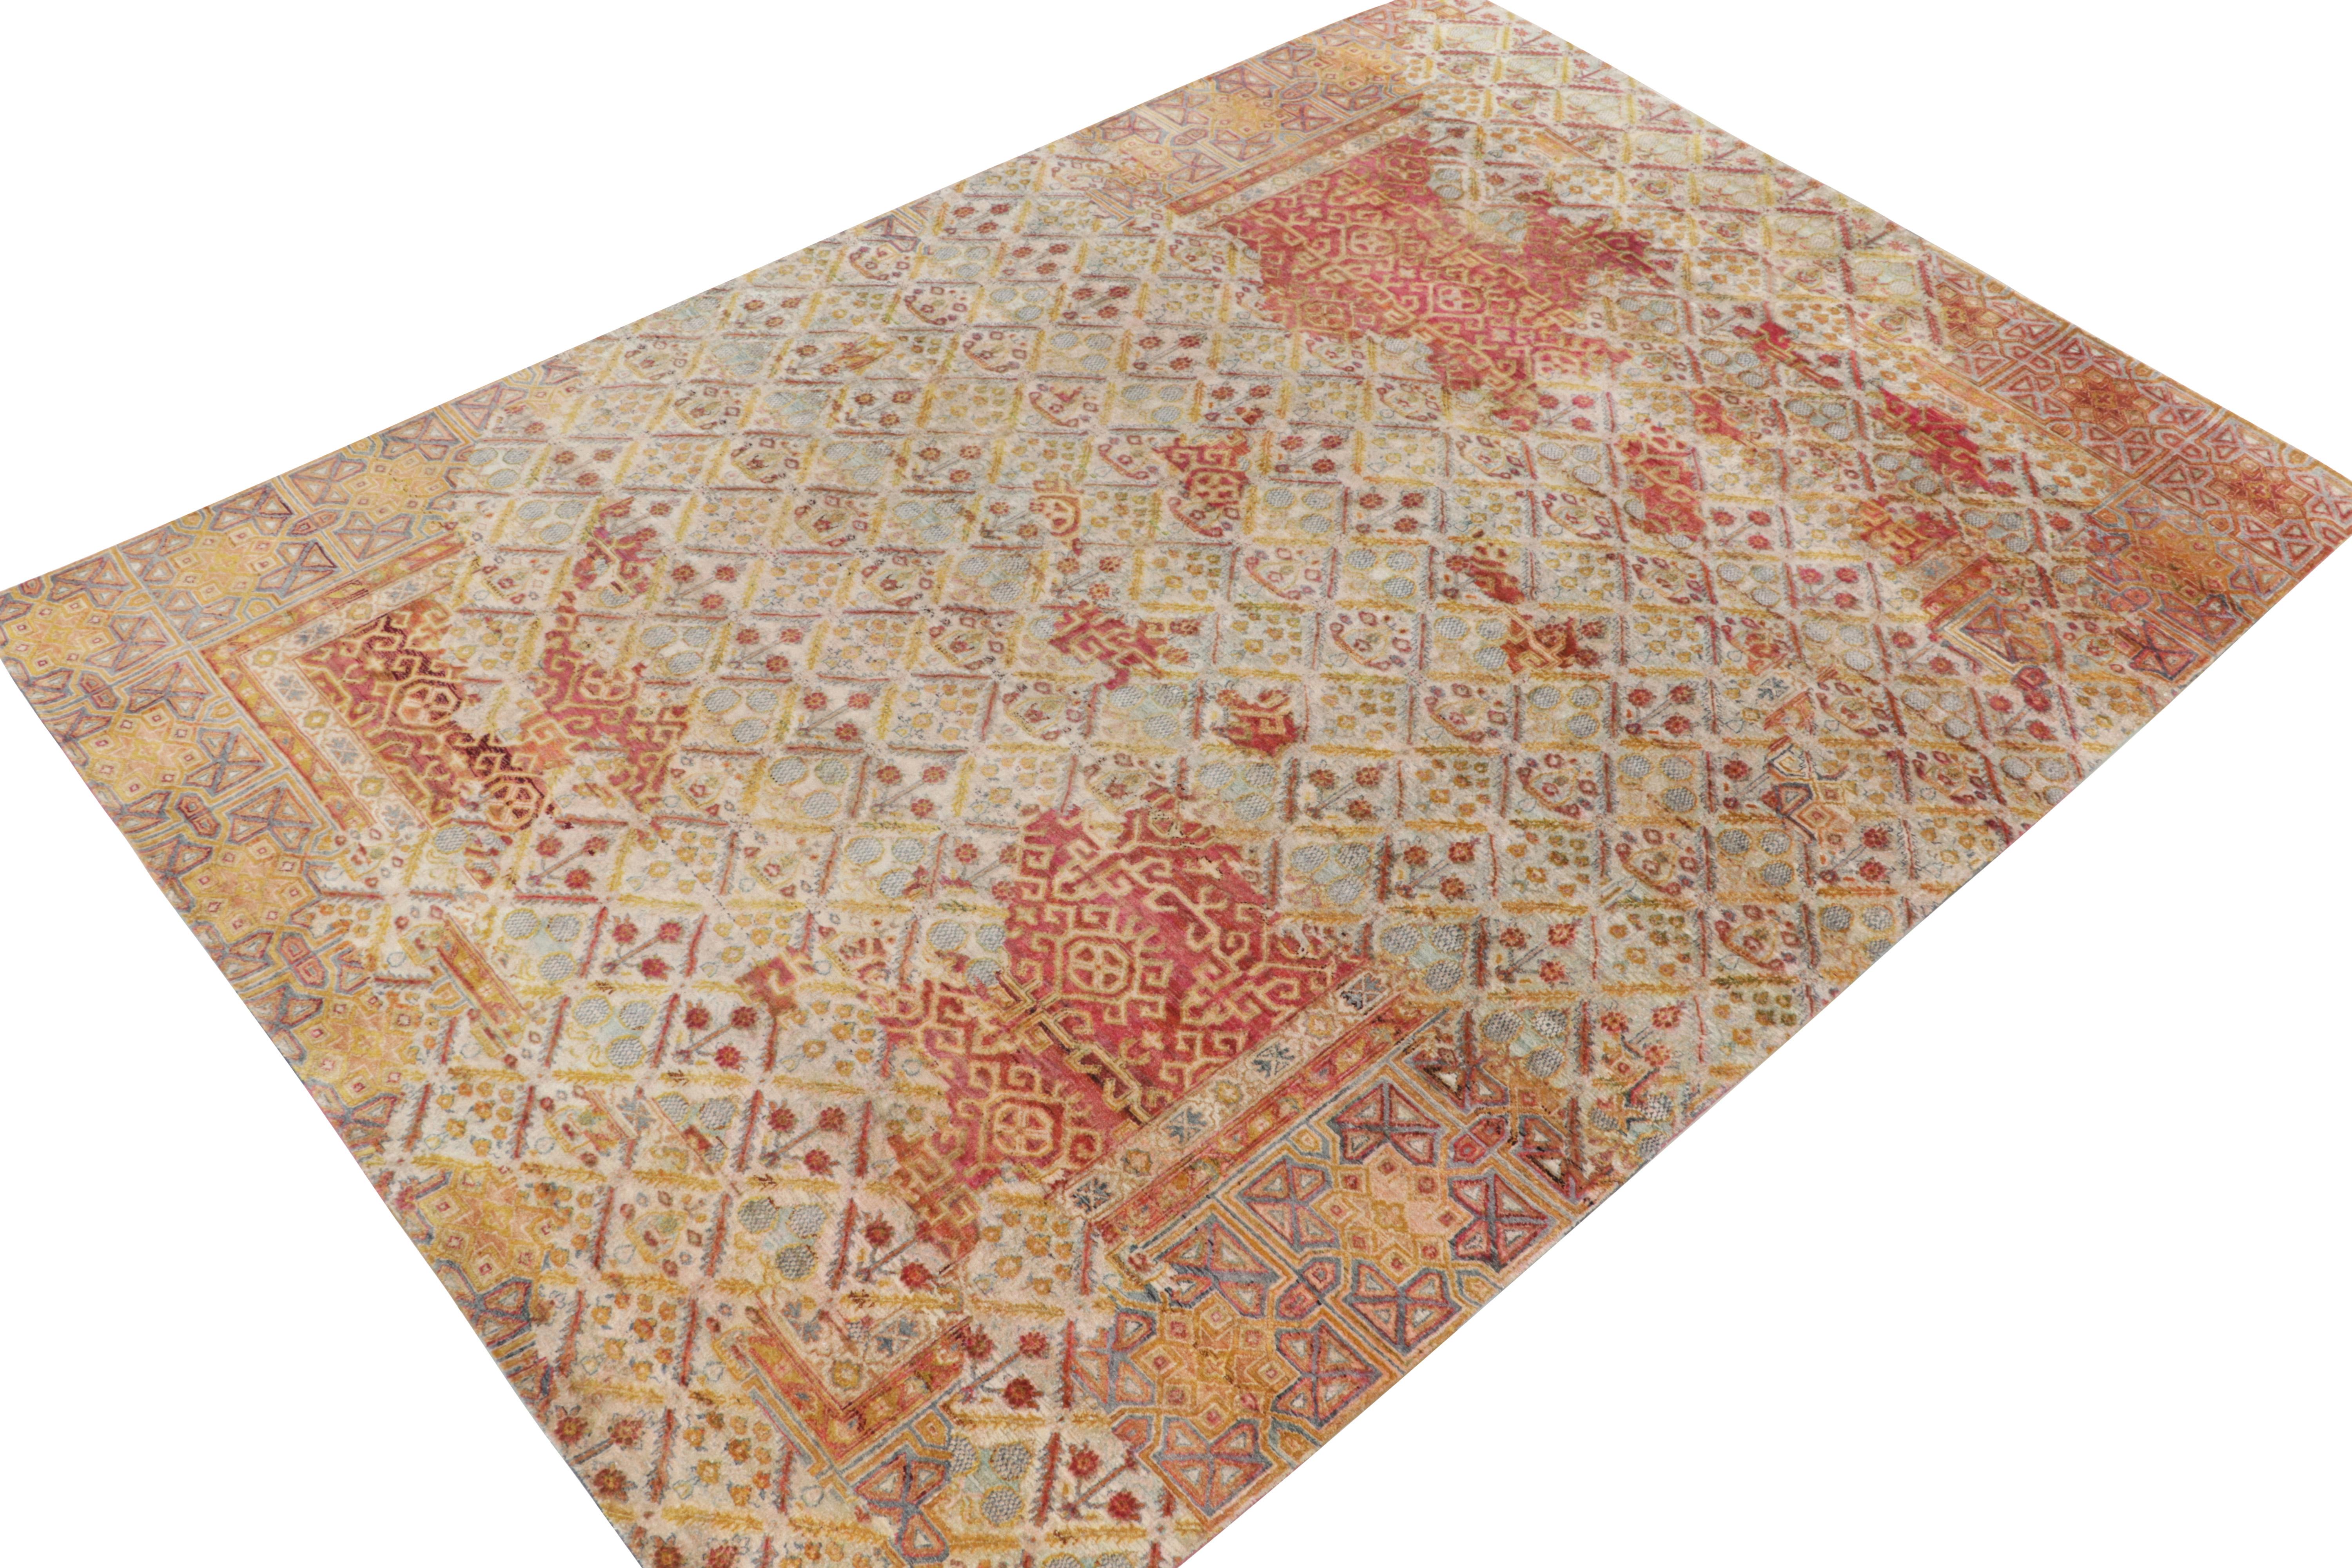 Indian Rug & Kilim’s Hand-Knotted Floral Rug in Red, Gold, Blue Geometric Pattern For Sale